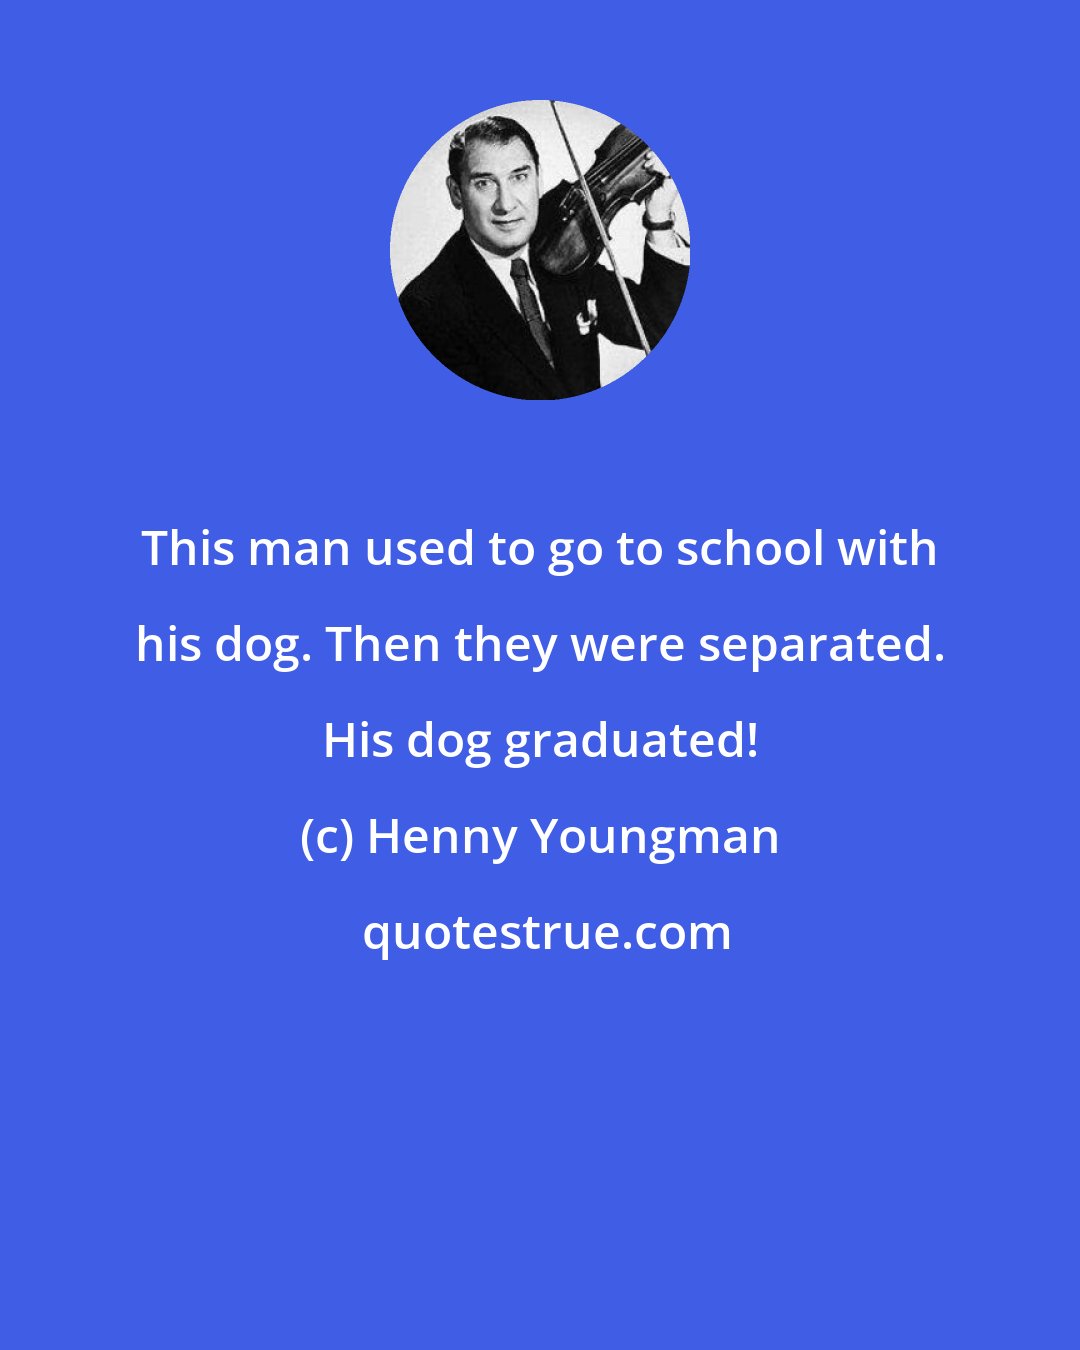 Henny Youngman: This man used to go to school with his dog. Then they were separated. His dog graduated!